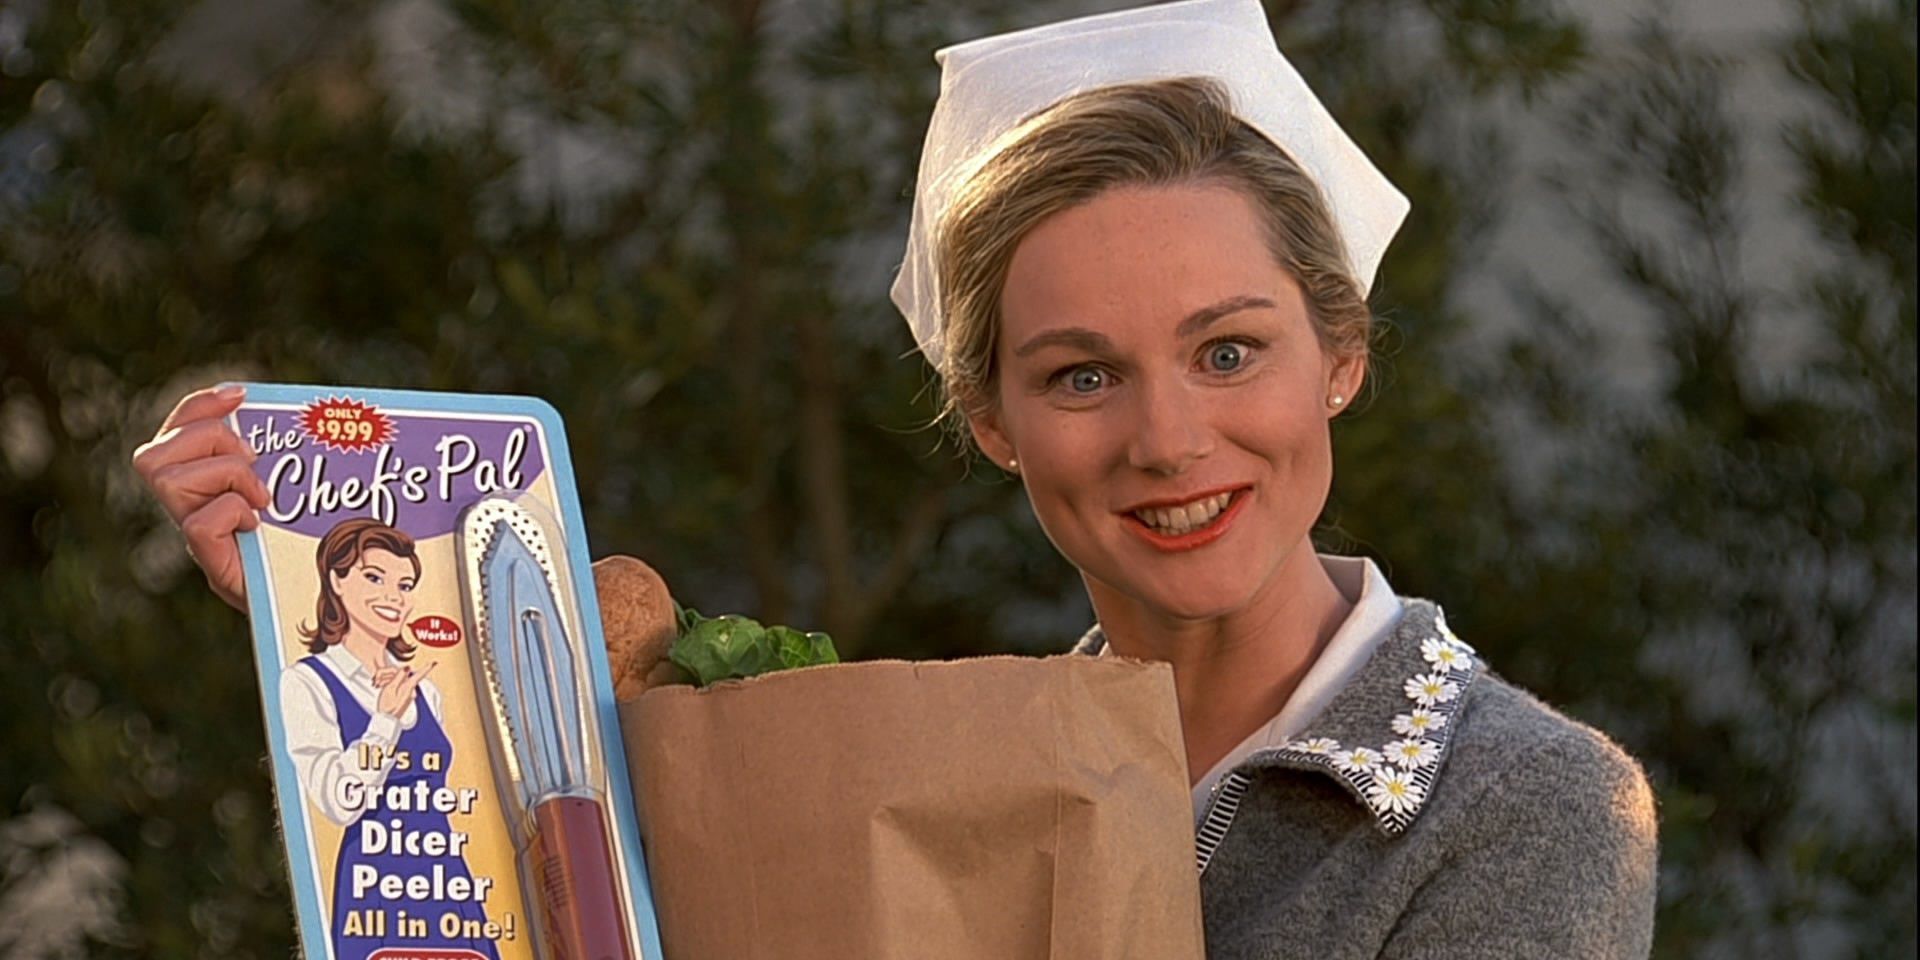 Laura Linney holding up product placement in The Truman Show